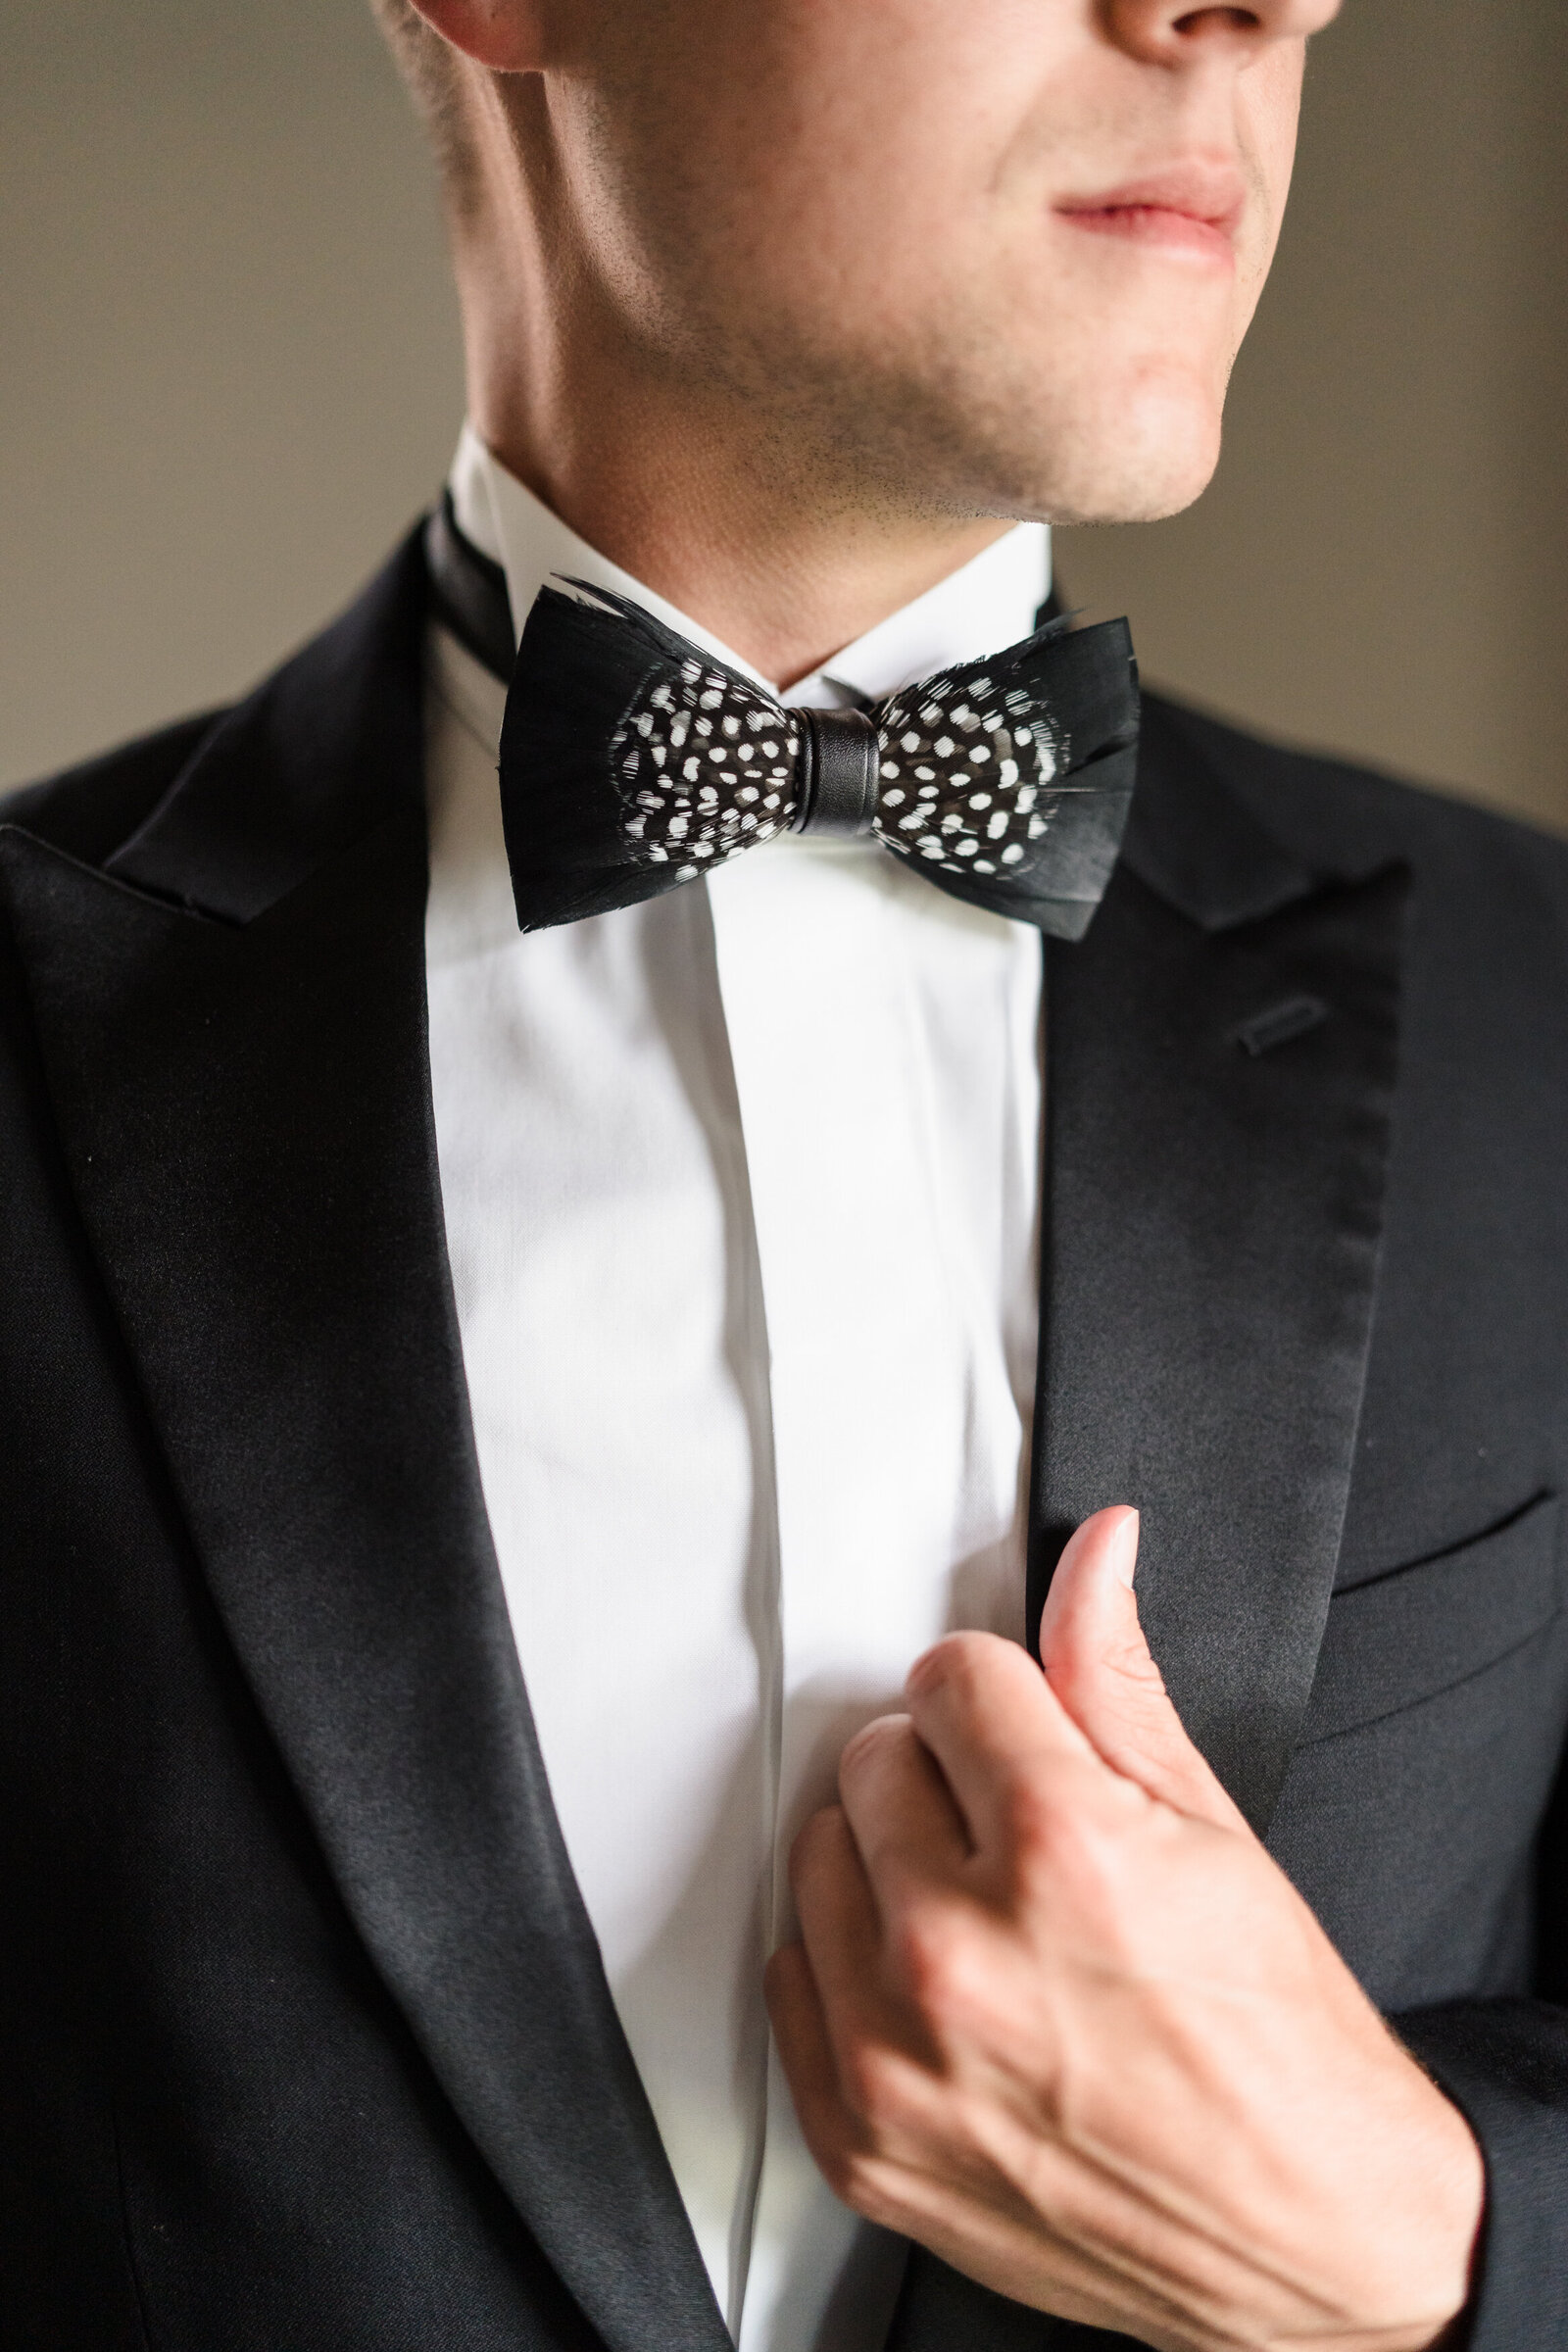 Detail photo of a groom's feather bow tie